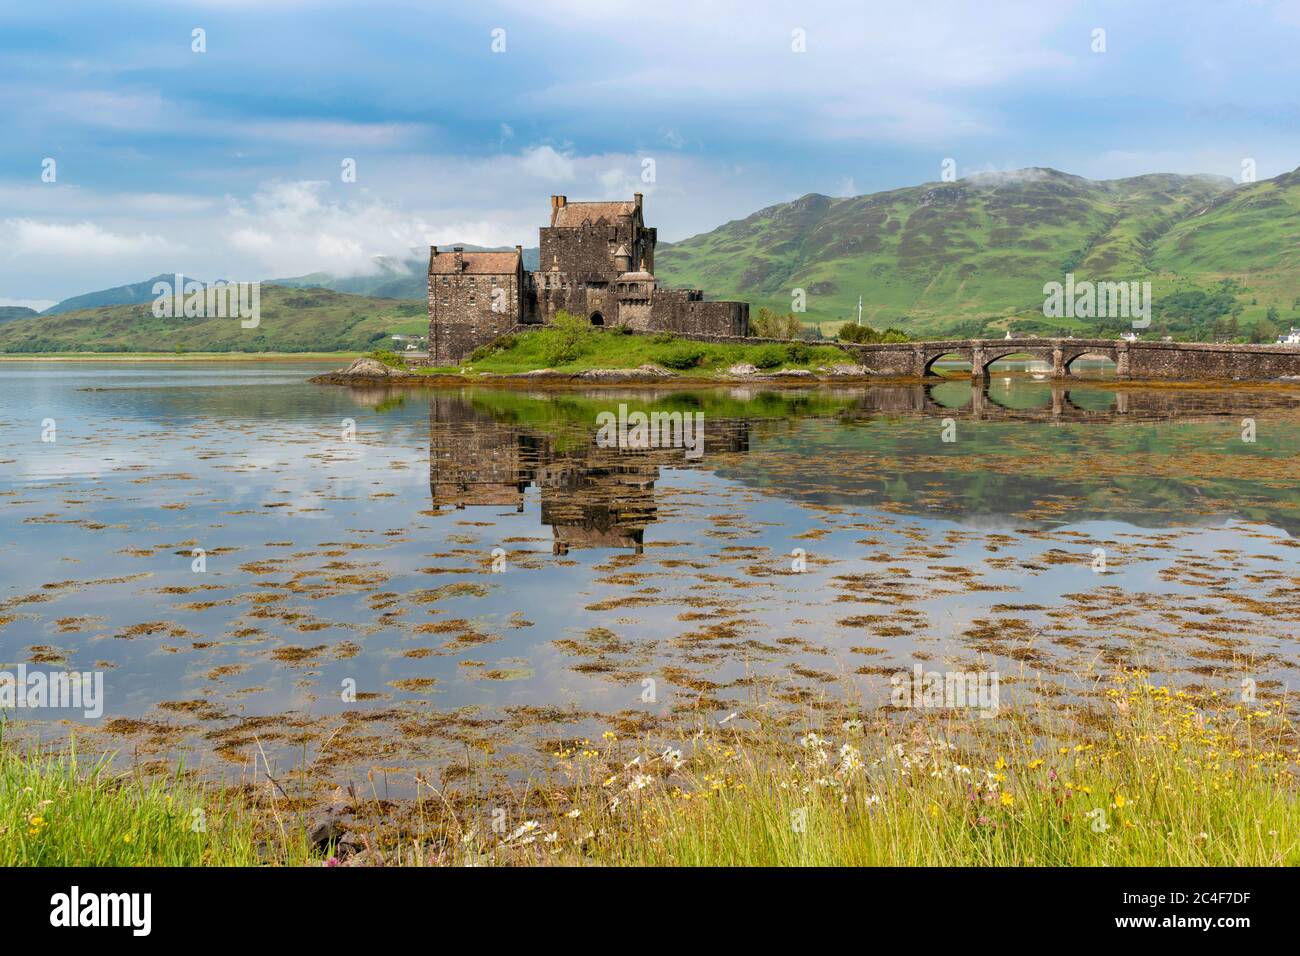 EILEAN DONAN CASTLE LOCH DUICH HIGHLAND SCOTLAND CASTLE ON AN ISLAND HIGH TIDE AND FLOWERS AND GRASSES IN JUNE Stock Photo